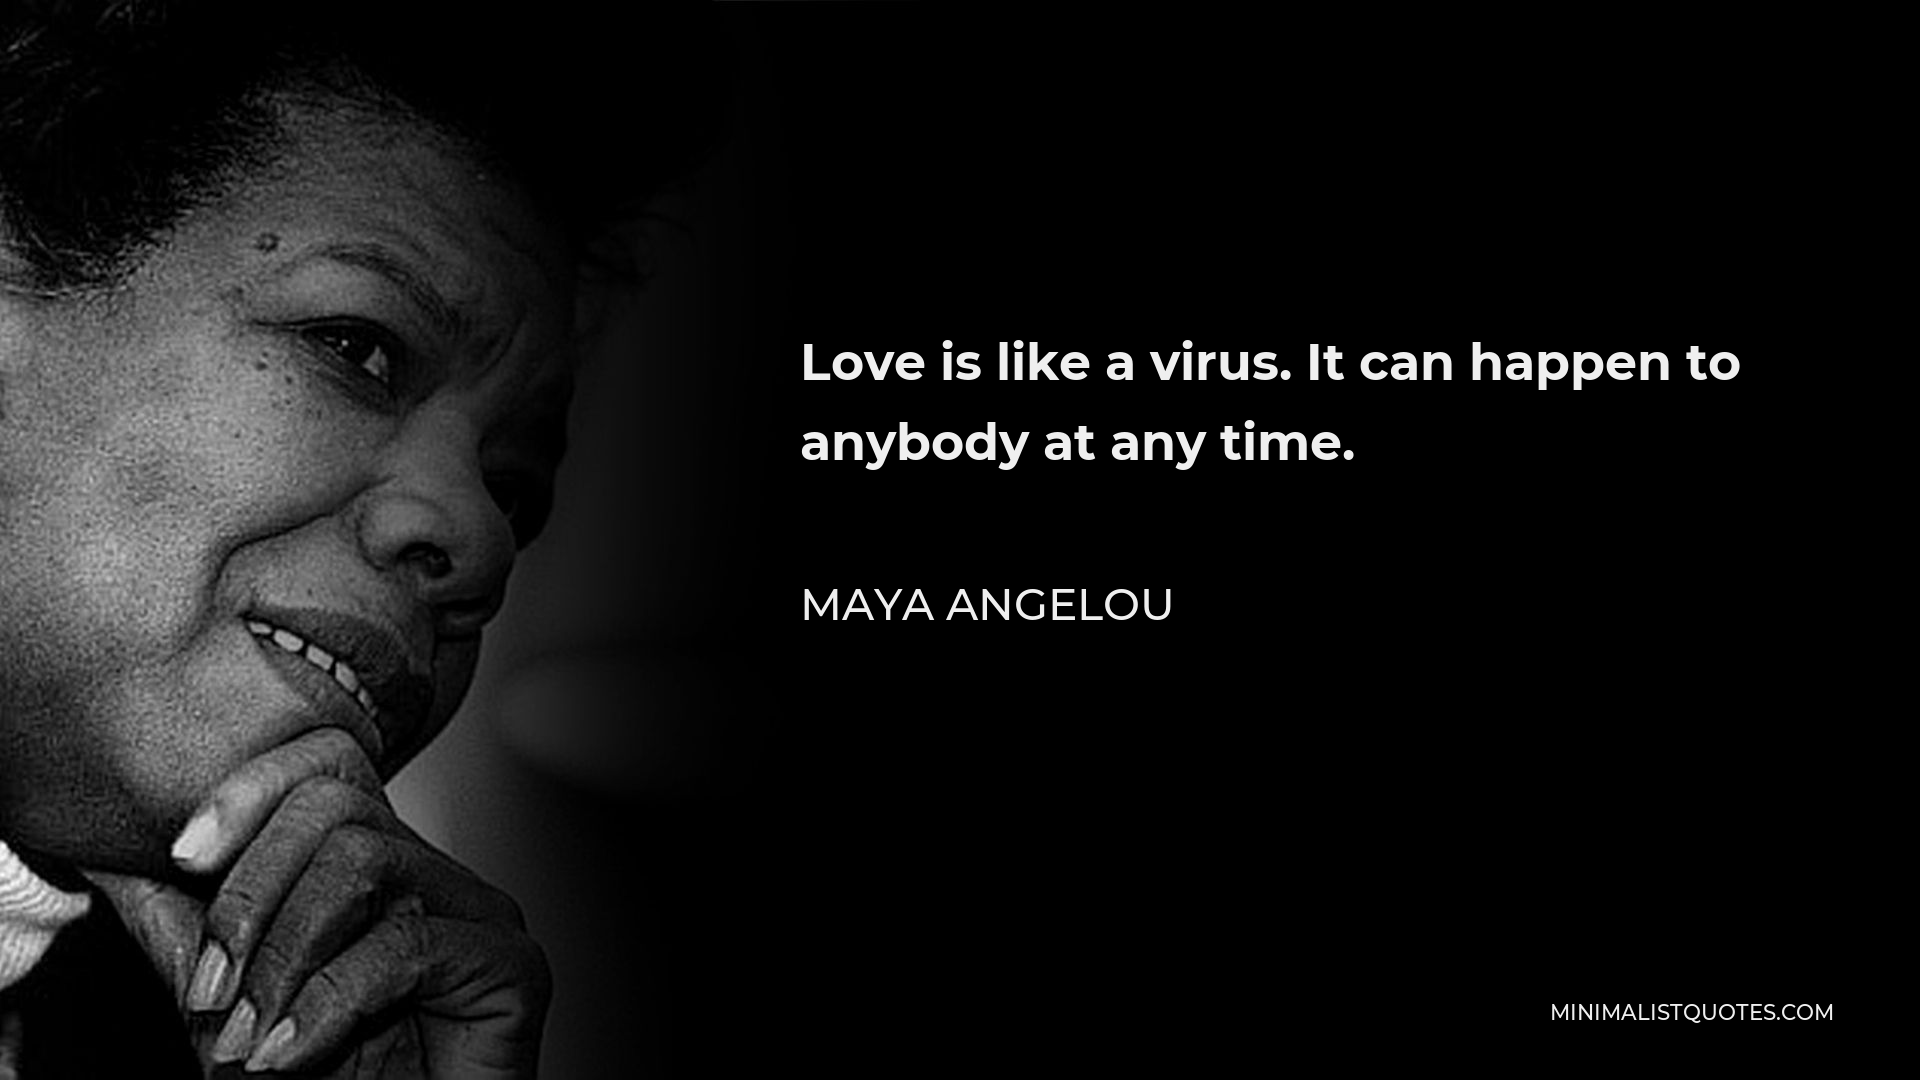 Maya Angelou Quote - Love is like a virus. It can happen to anybody at any time.